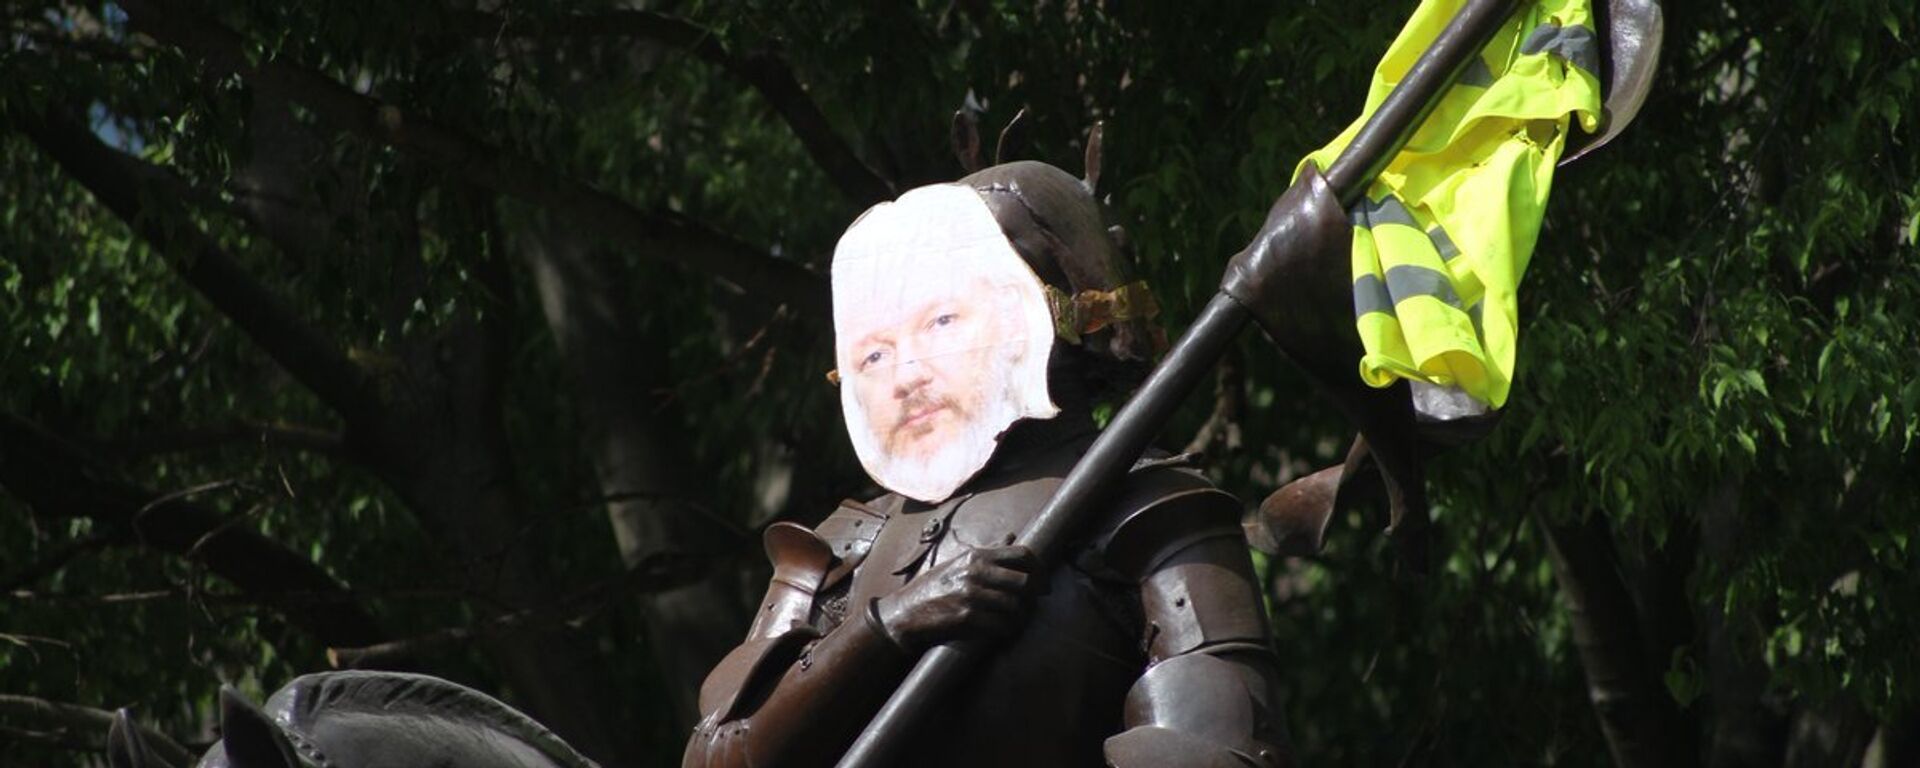 Photo of Julian Assange attached to the statue of Joan of Arc in Toulouse, France - Sputnik International, 1920, 15.11.2021